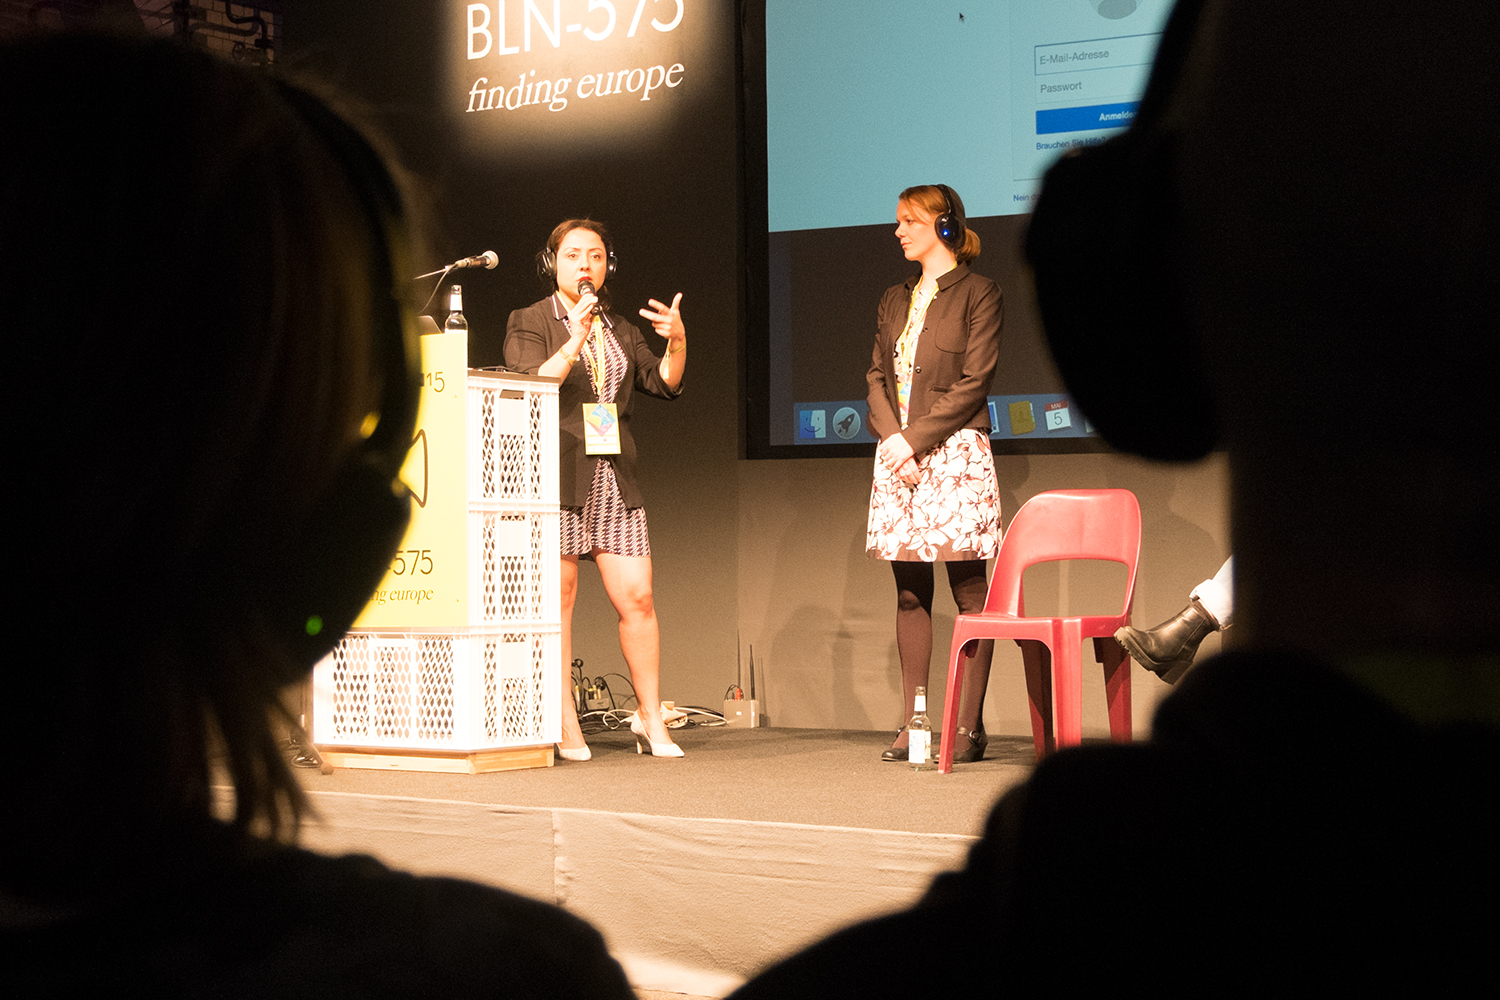 Photo of two women speaking on stage from behind the heads of two audience members